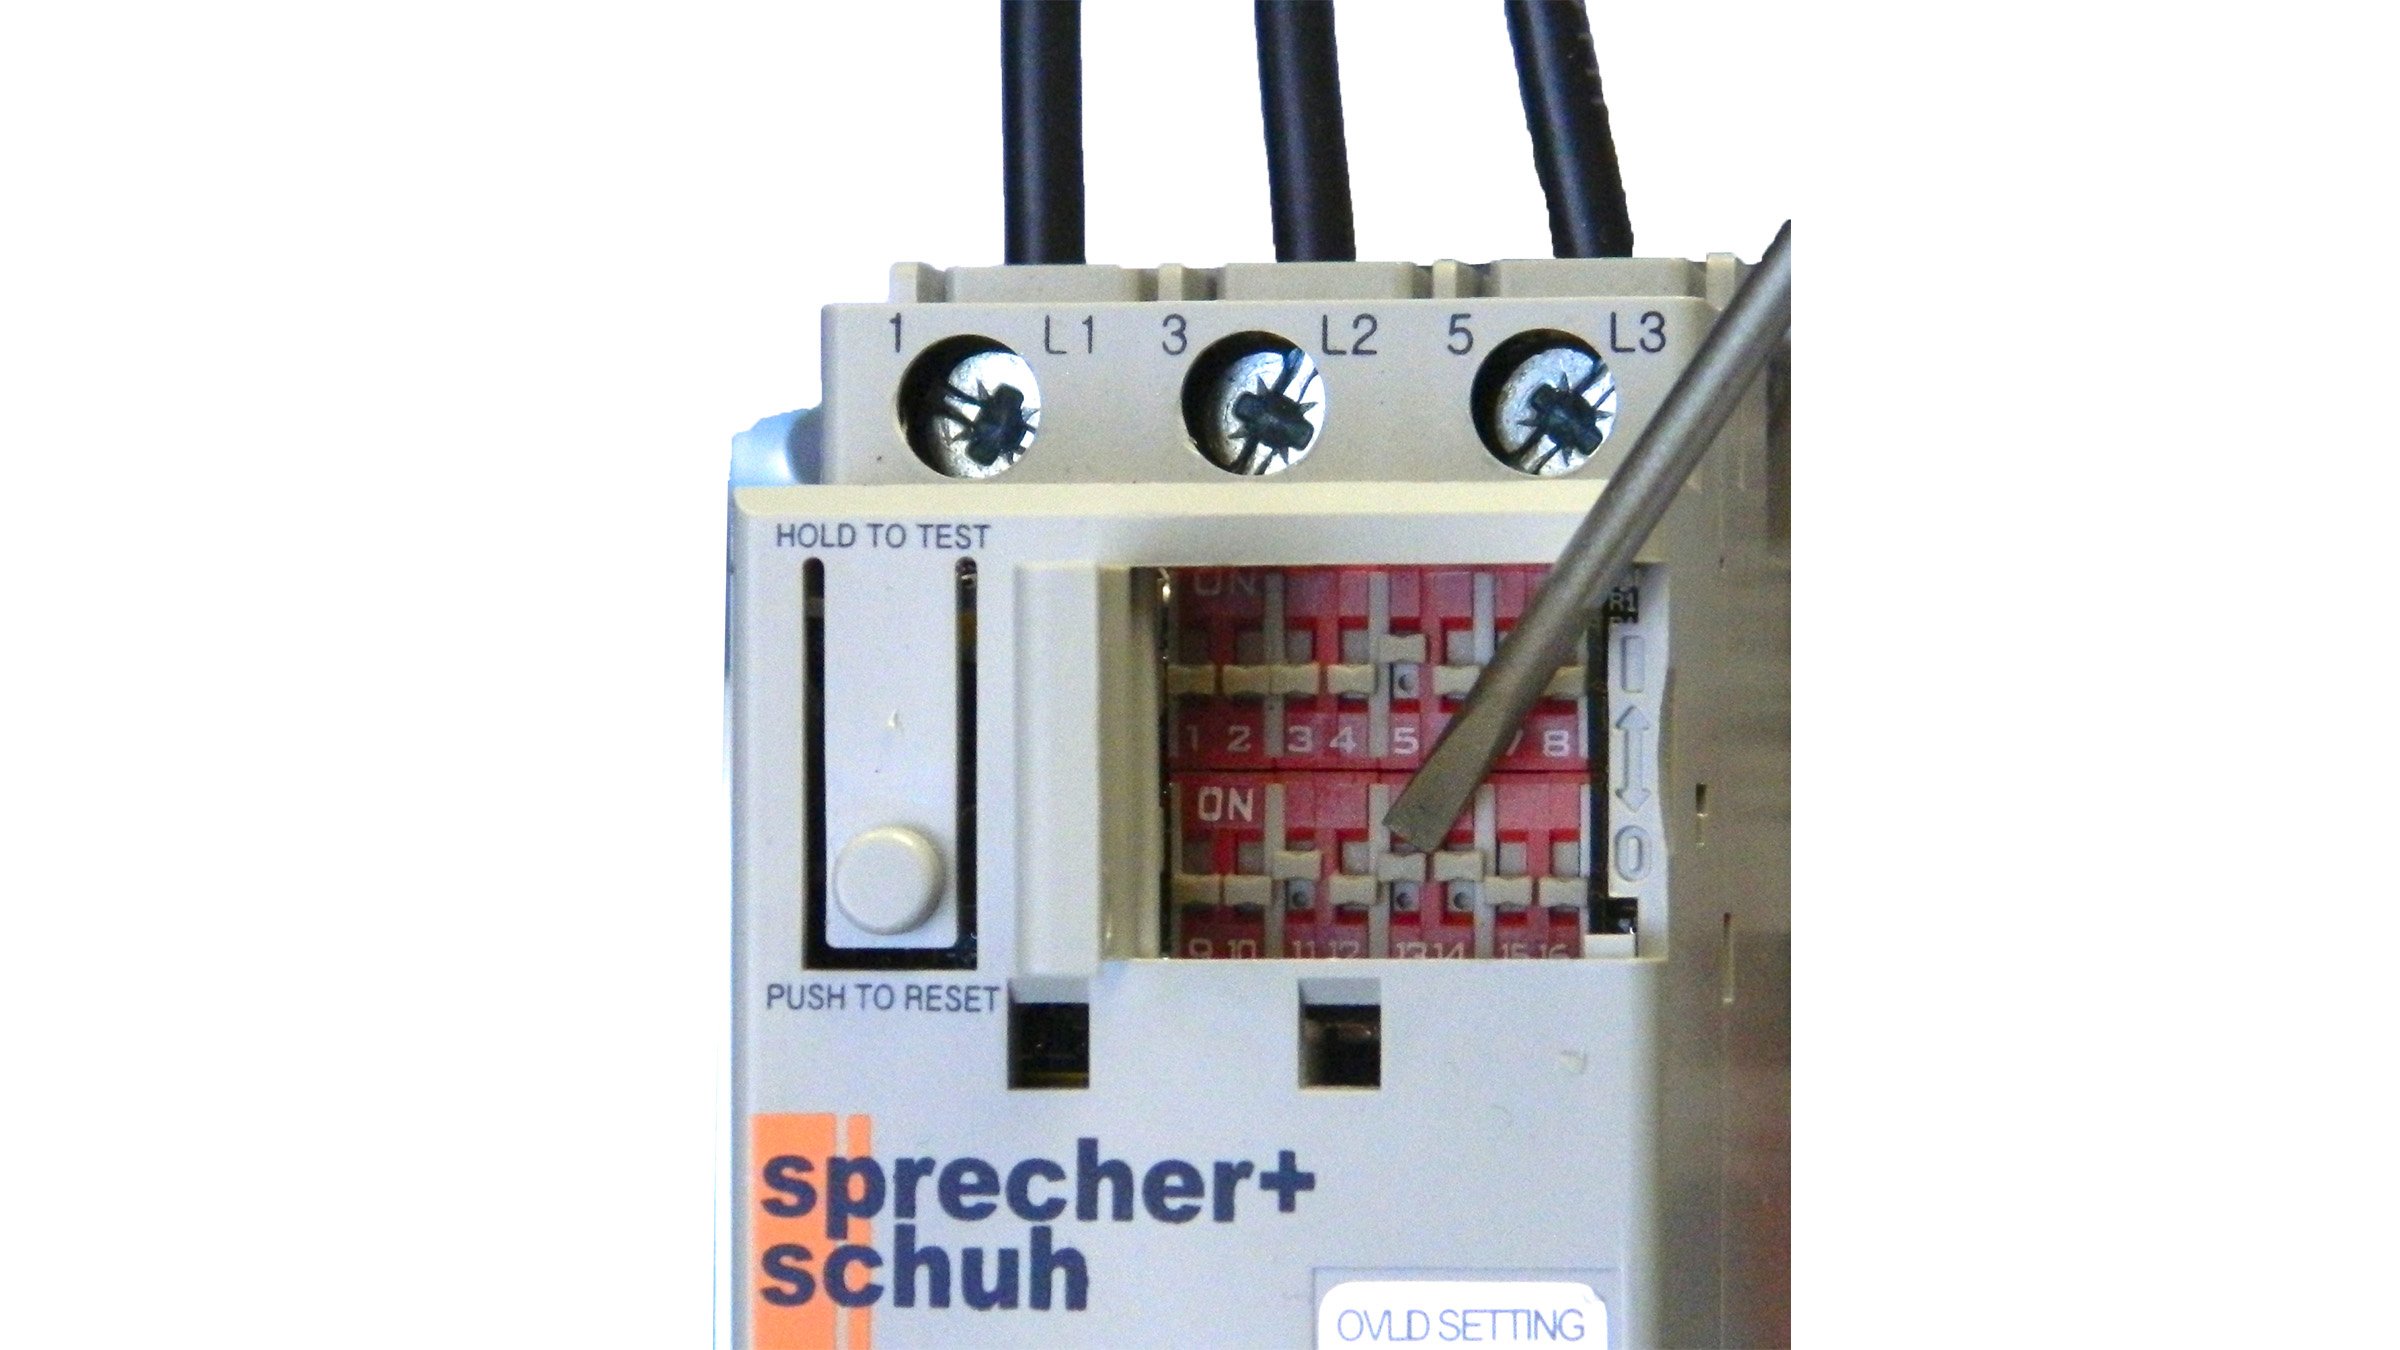 Sprecher & Schuh Series PCE softstarter controller DIP switch setting location on face of controller